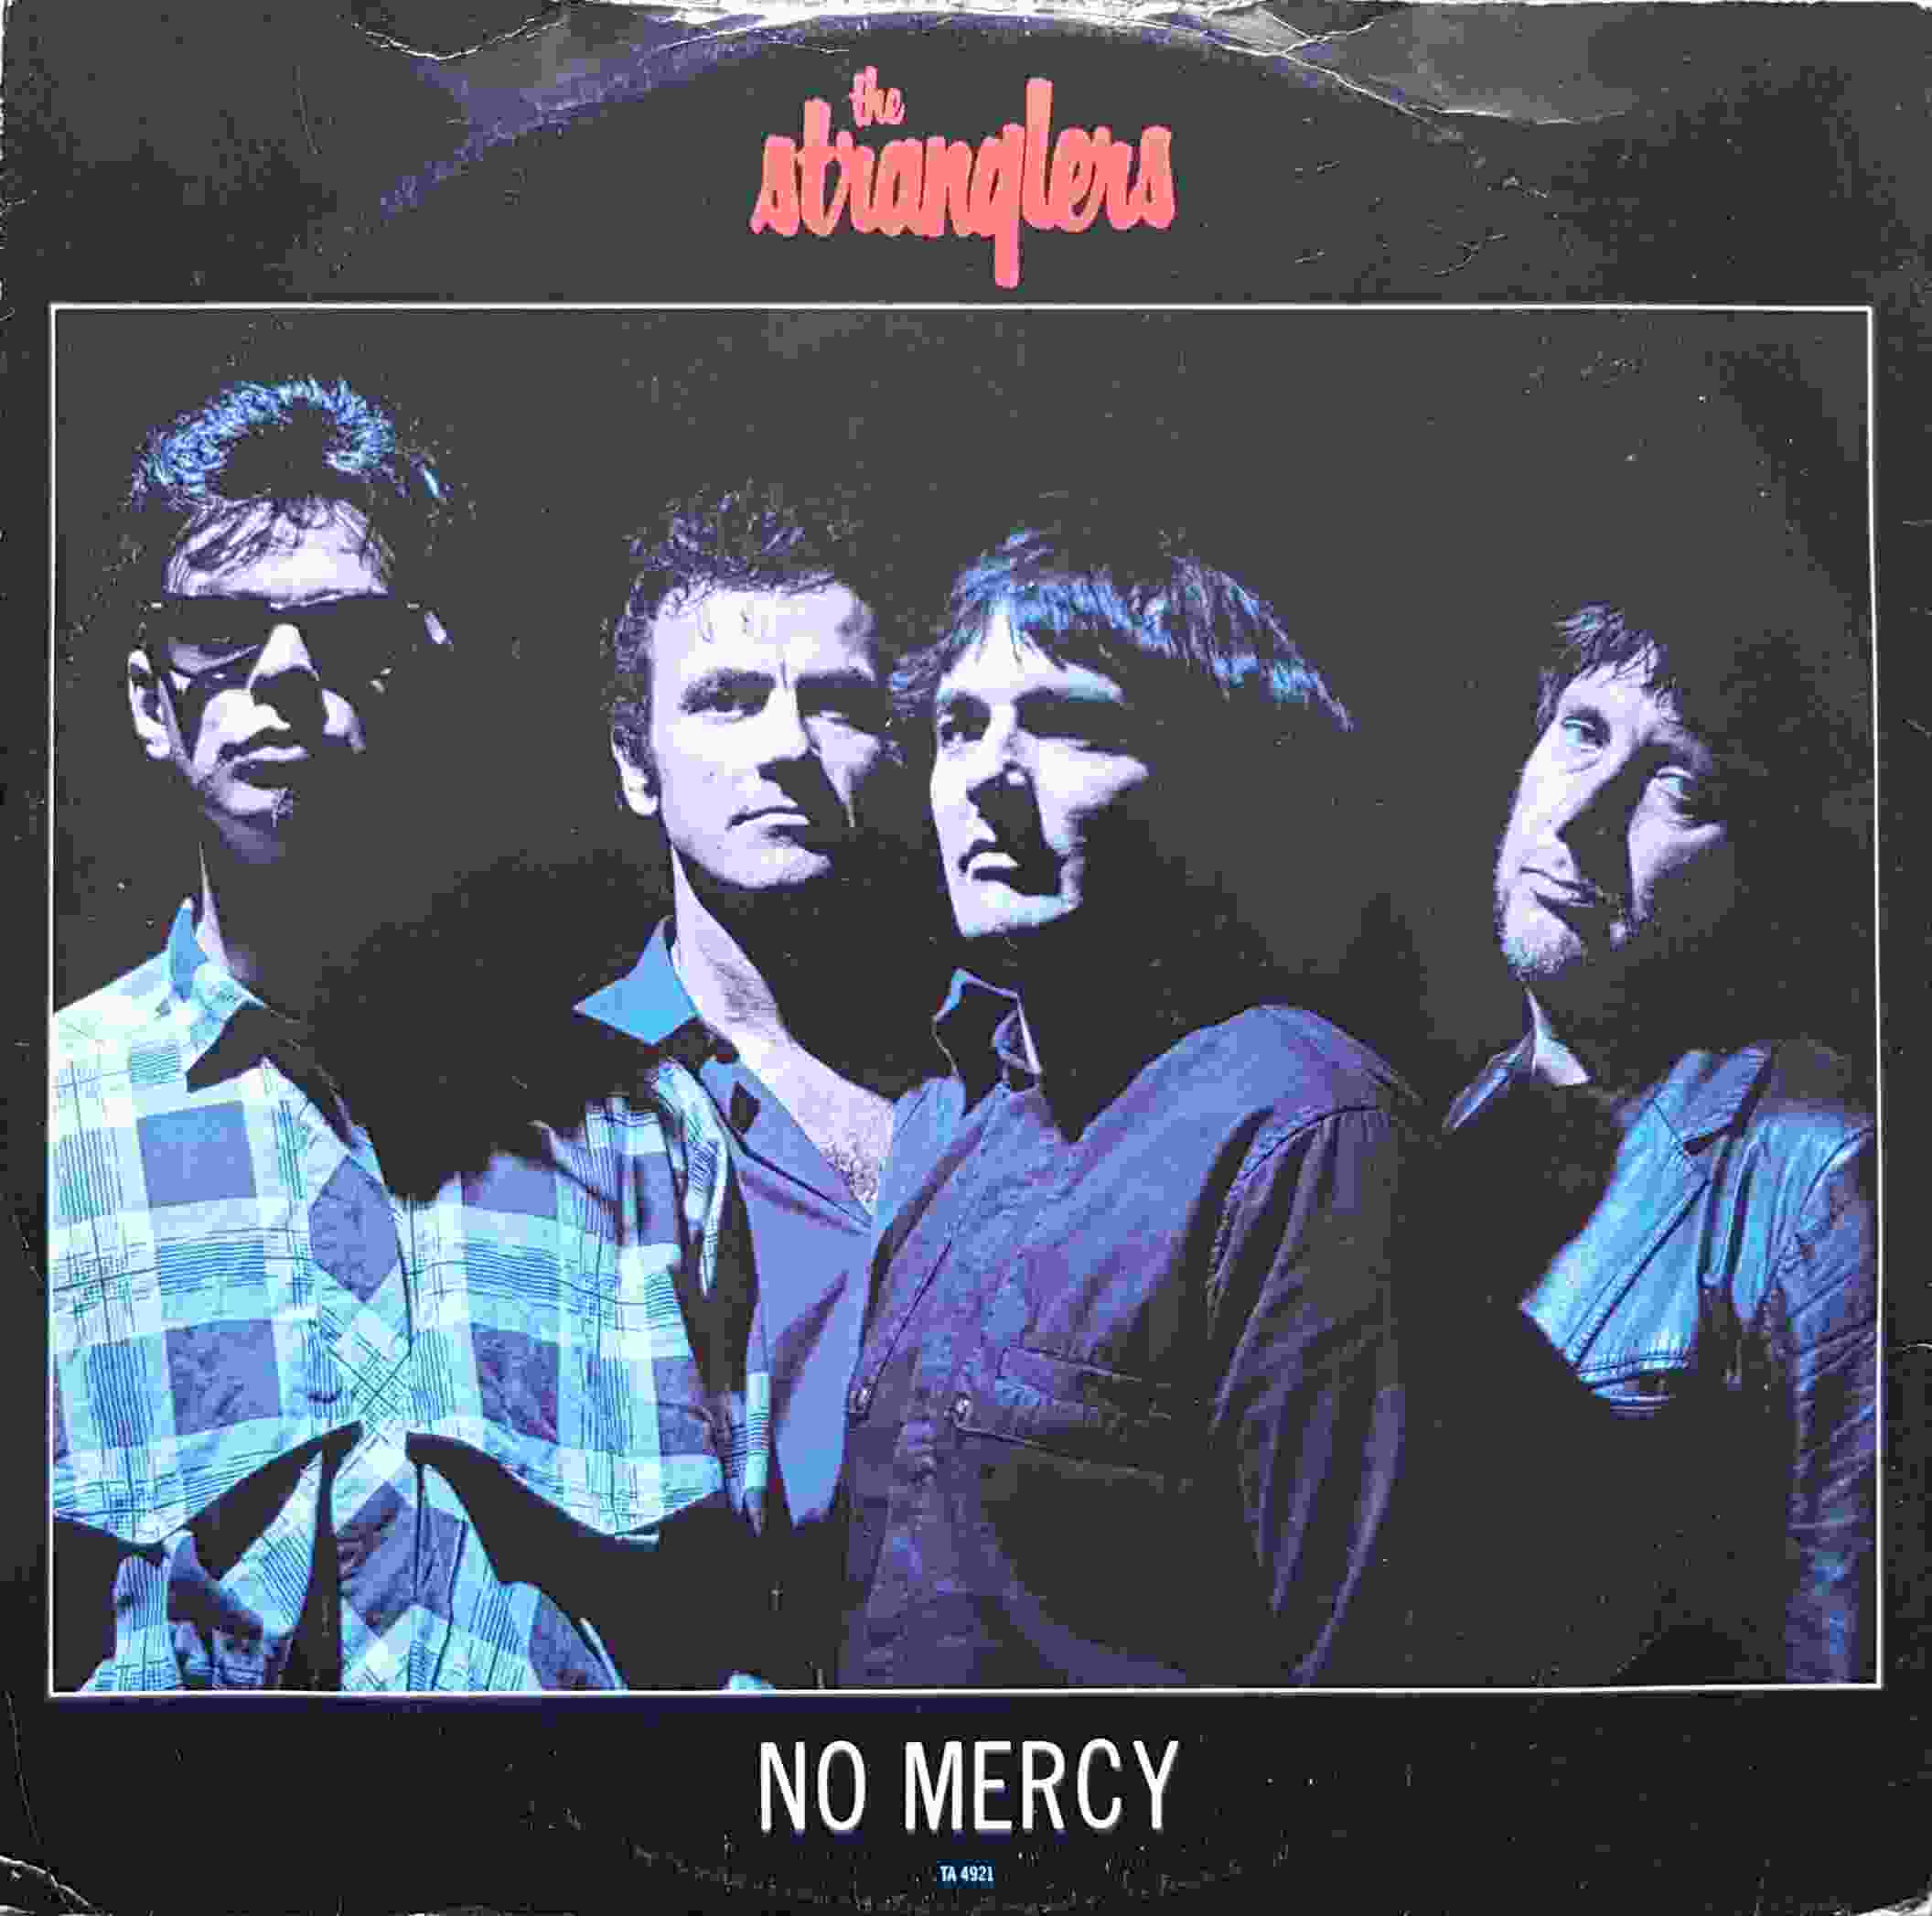 Picture of TA 4921 No mercy by artist The Stranglers from The Stranglers 12inches